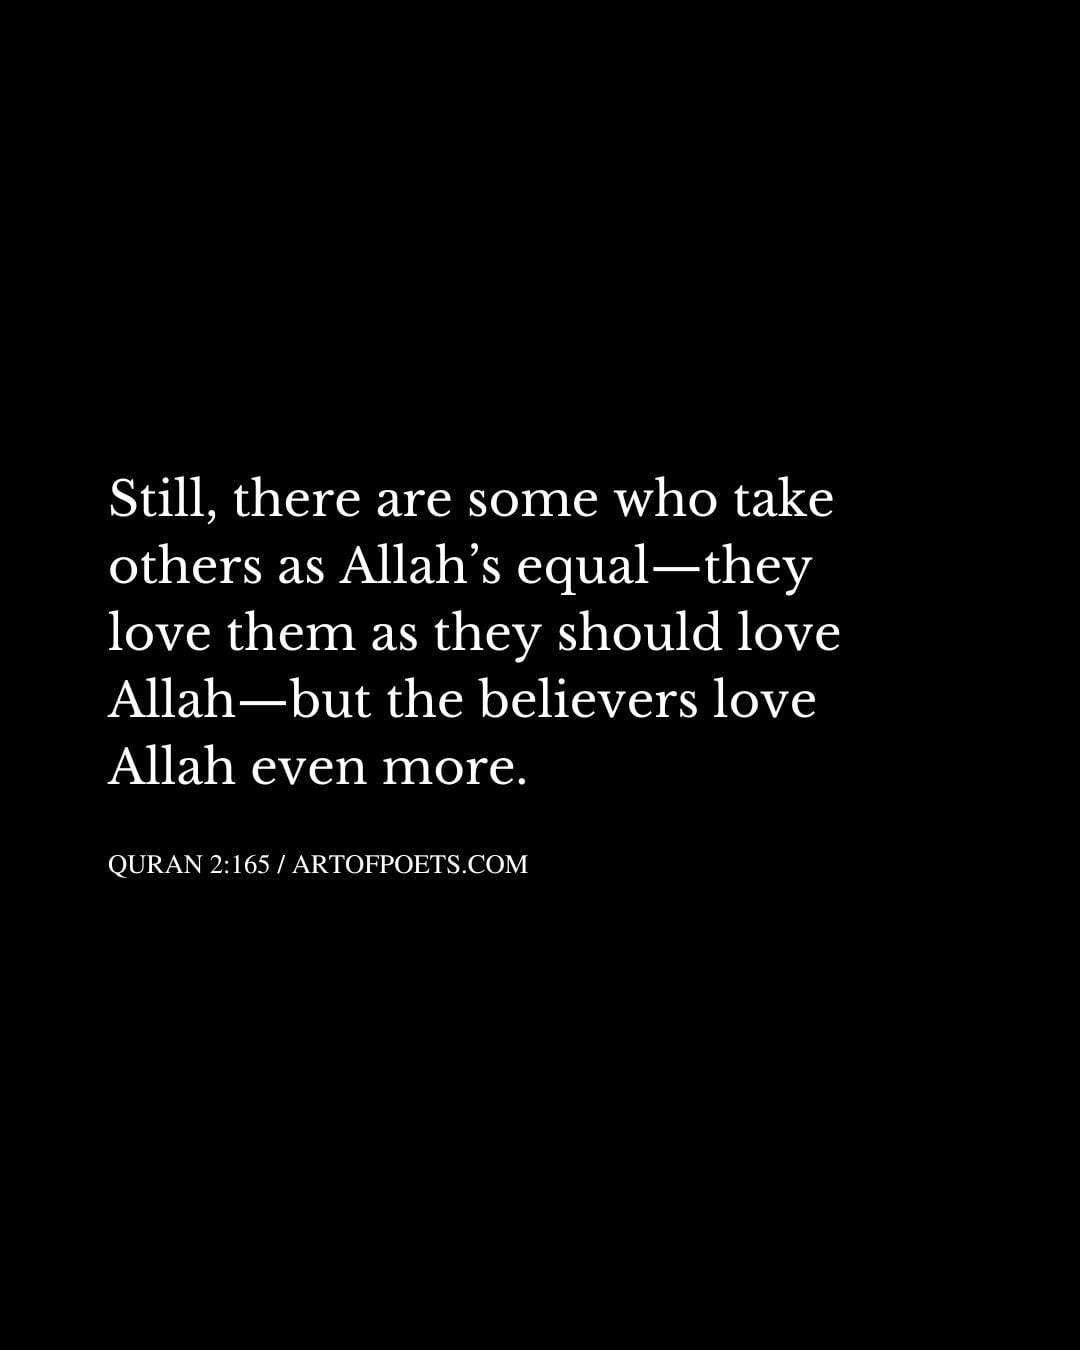 Still there are some who take others as Allahs equal—they love them as they should love Allah—but the believers love Allah even more